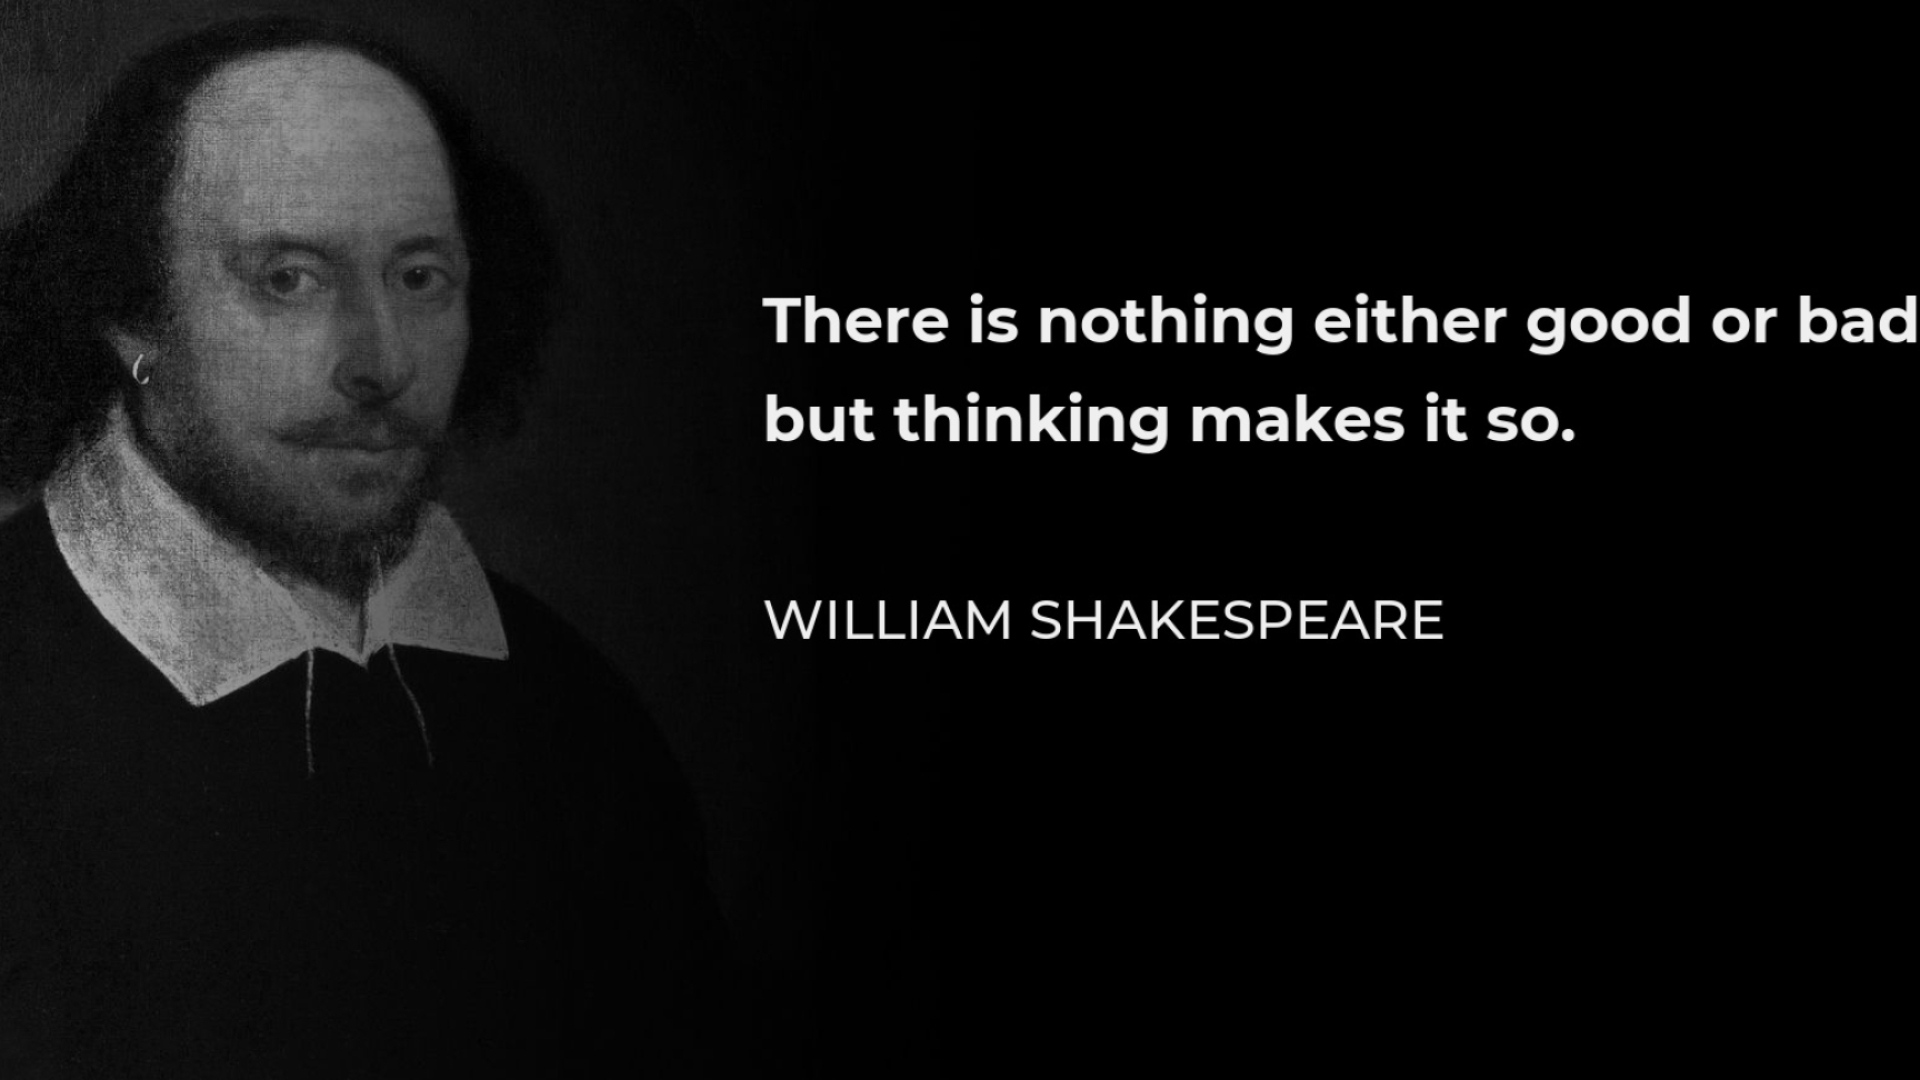 William Shakespeare, Quote, Good or bad, Thinking, 1920x1080 Full HD Desktop